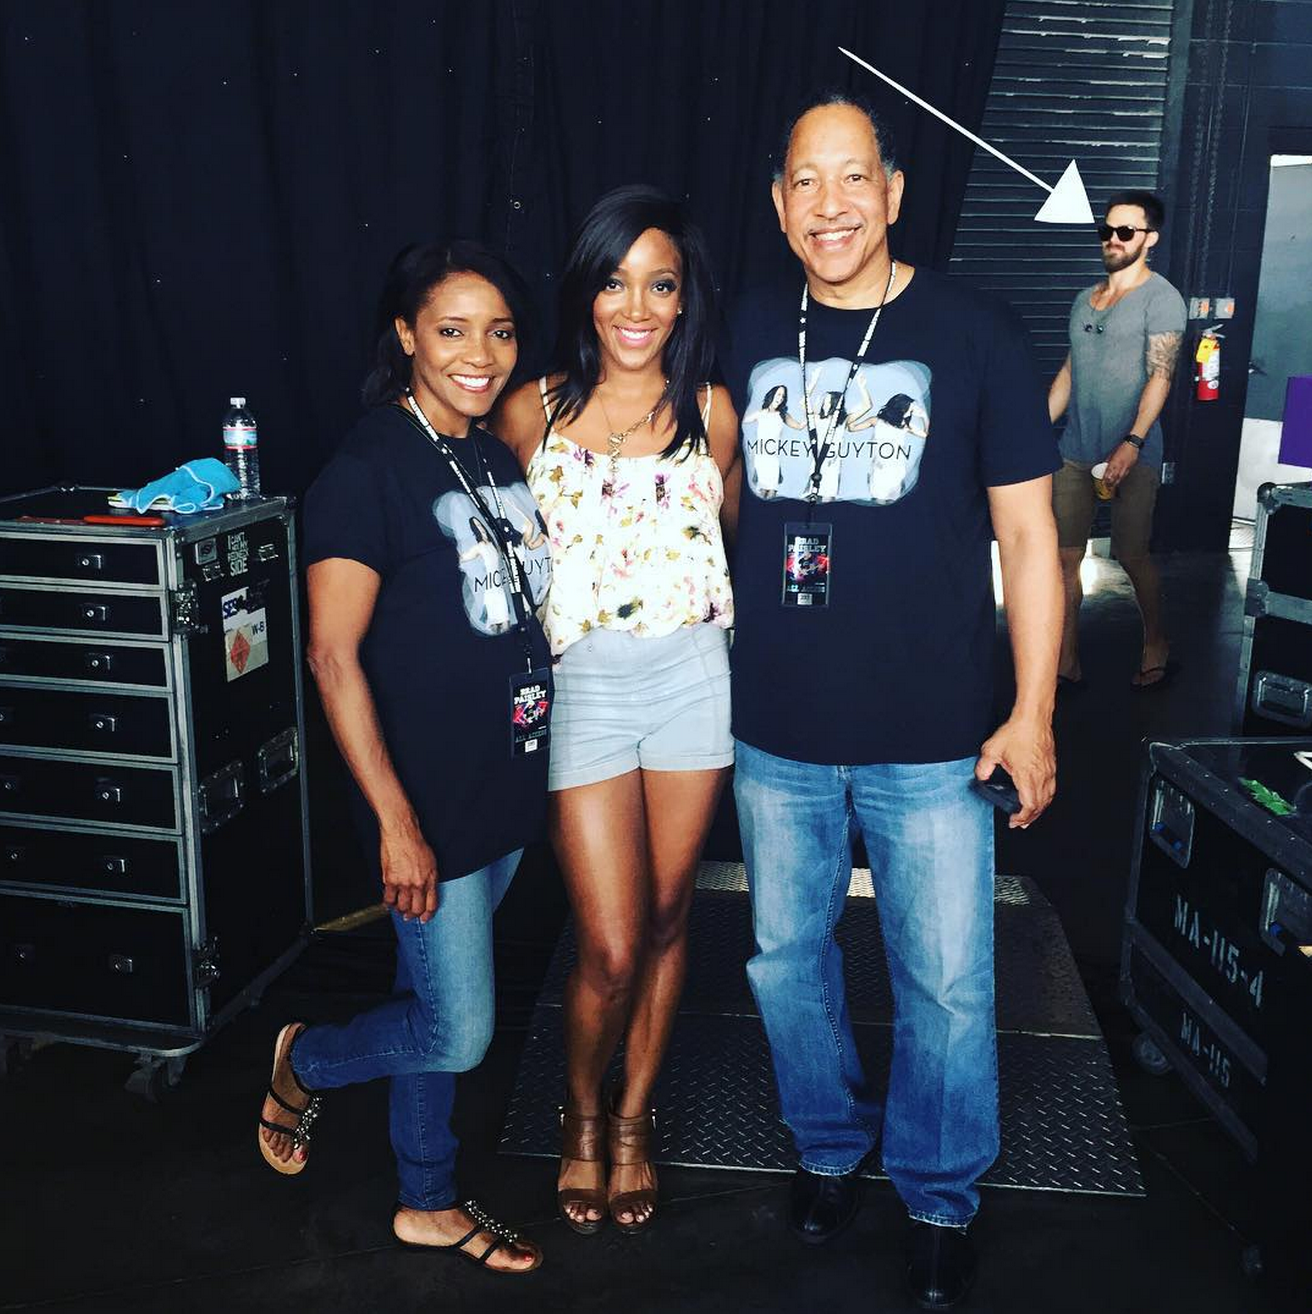 Mickey Guyton on Twitter: &quot;It was so great to have my mom and dad and creepy @chrisalaways at my last show on the #crushinittour 💃😁 http://t.co/0aeTd1m0xM&quot; / Twitter